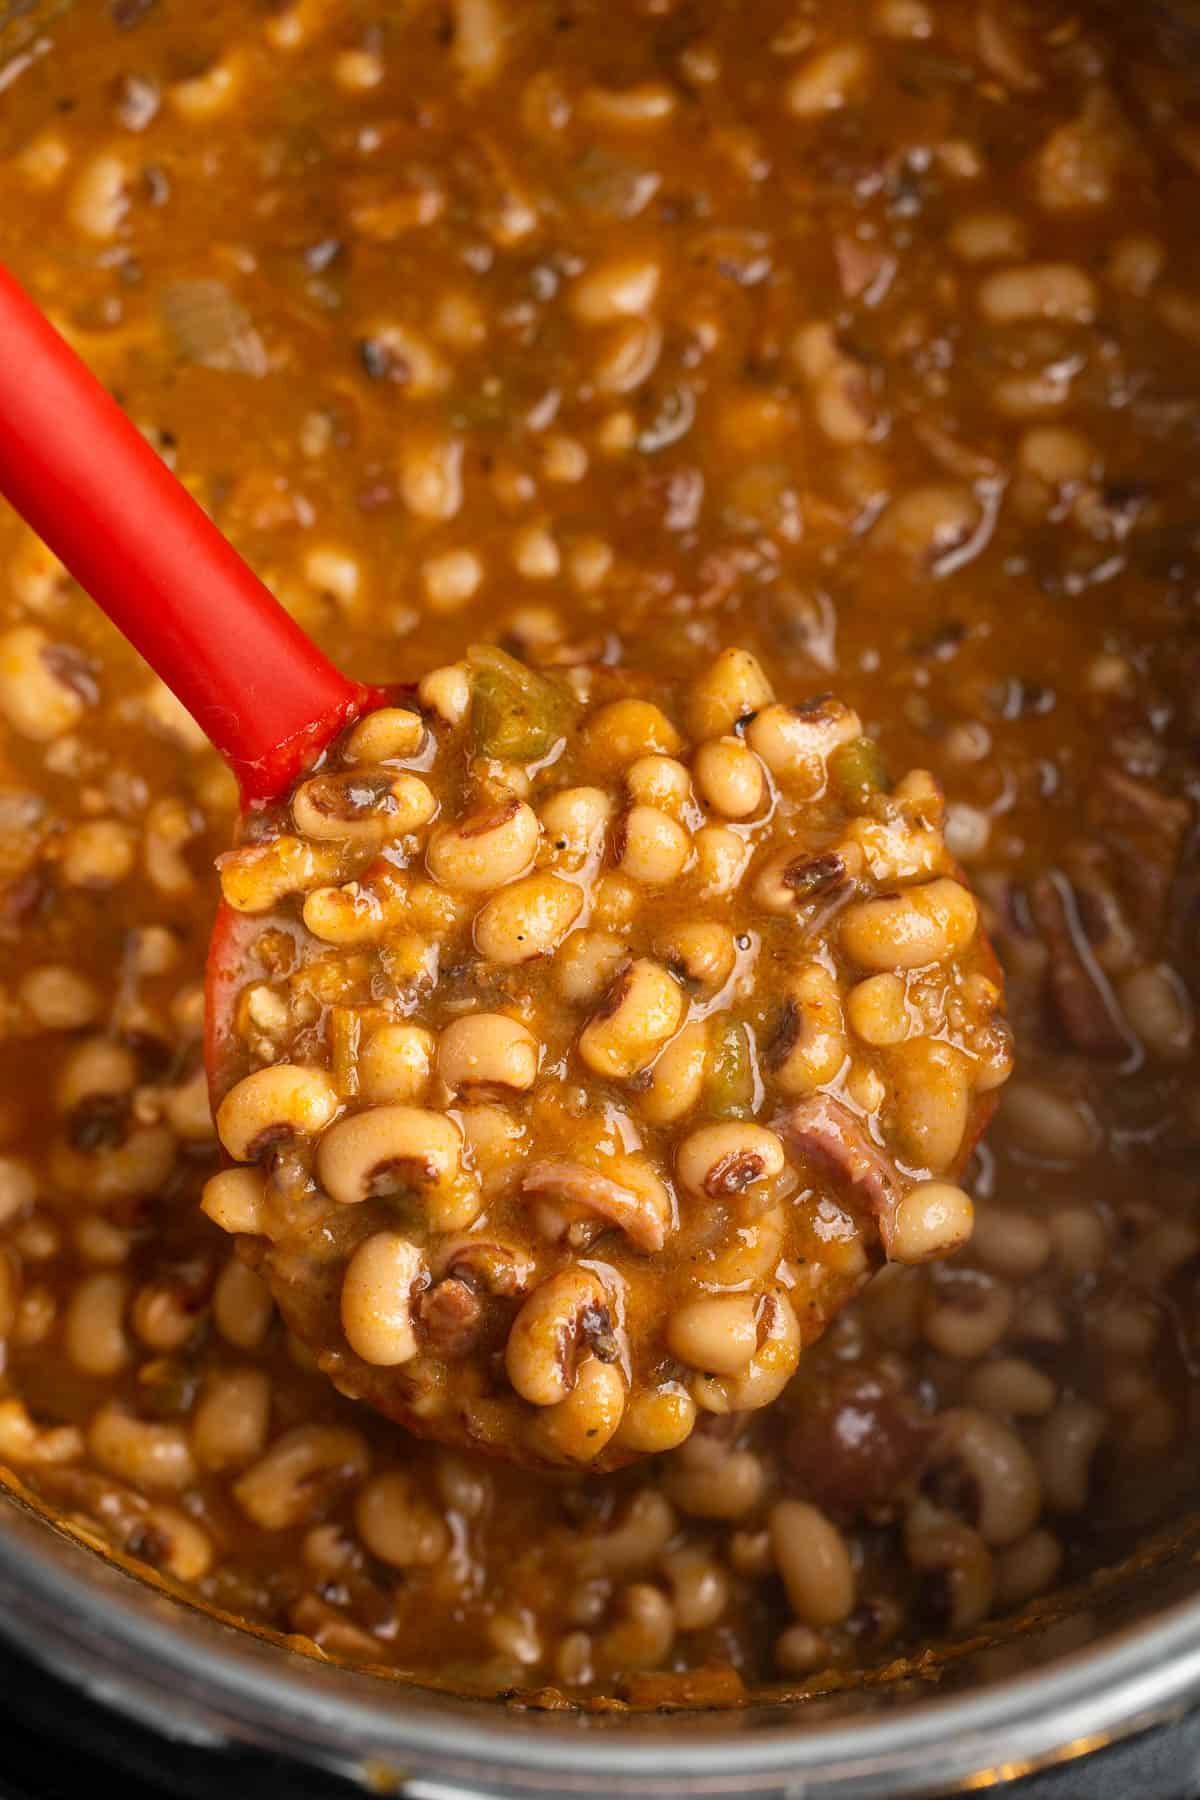 A ladleful of Southern black eyed peas.